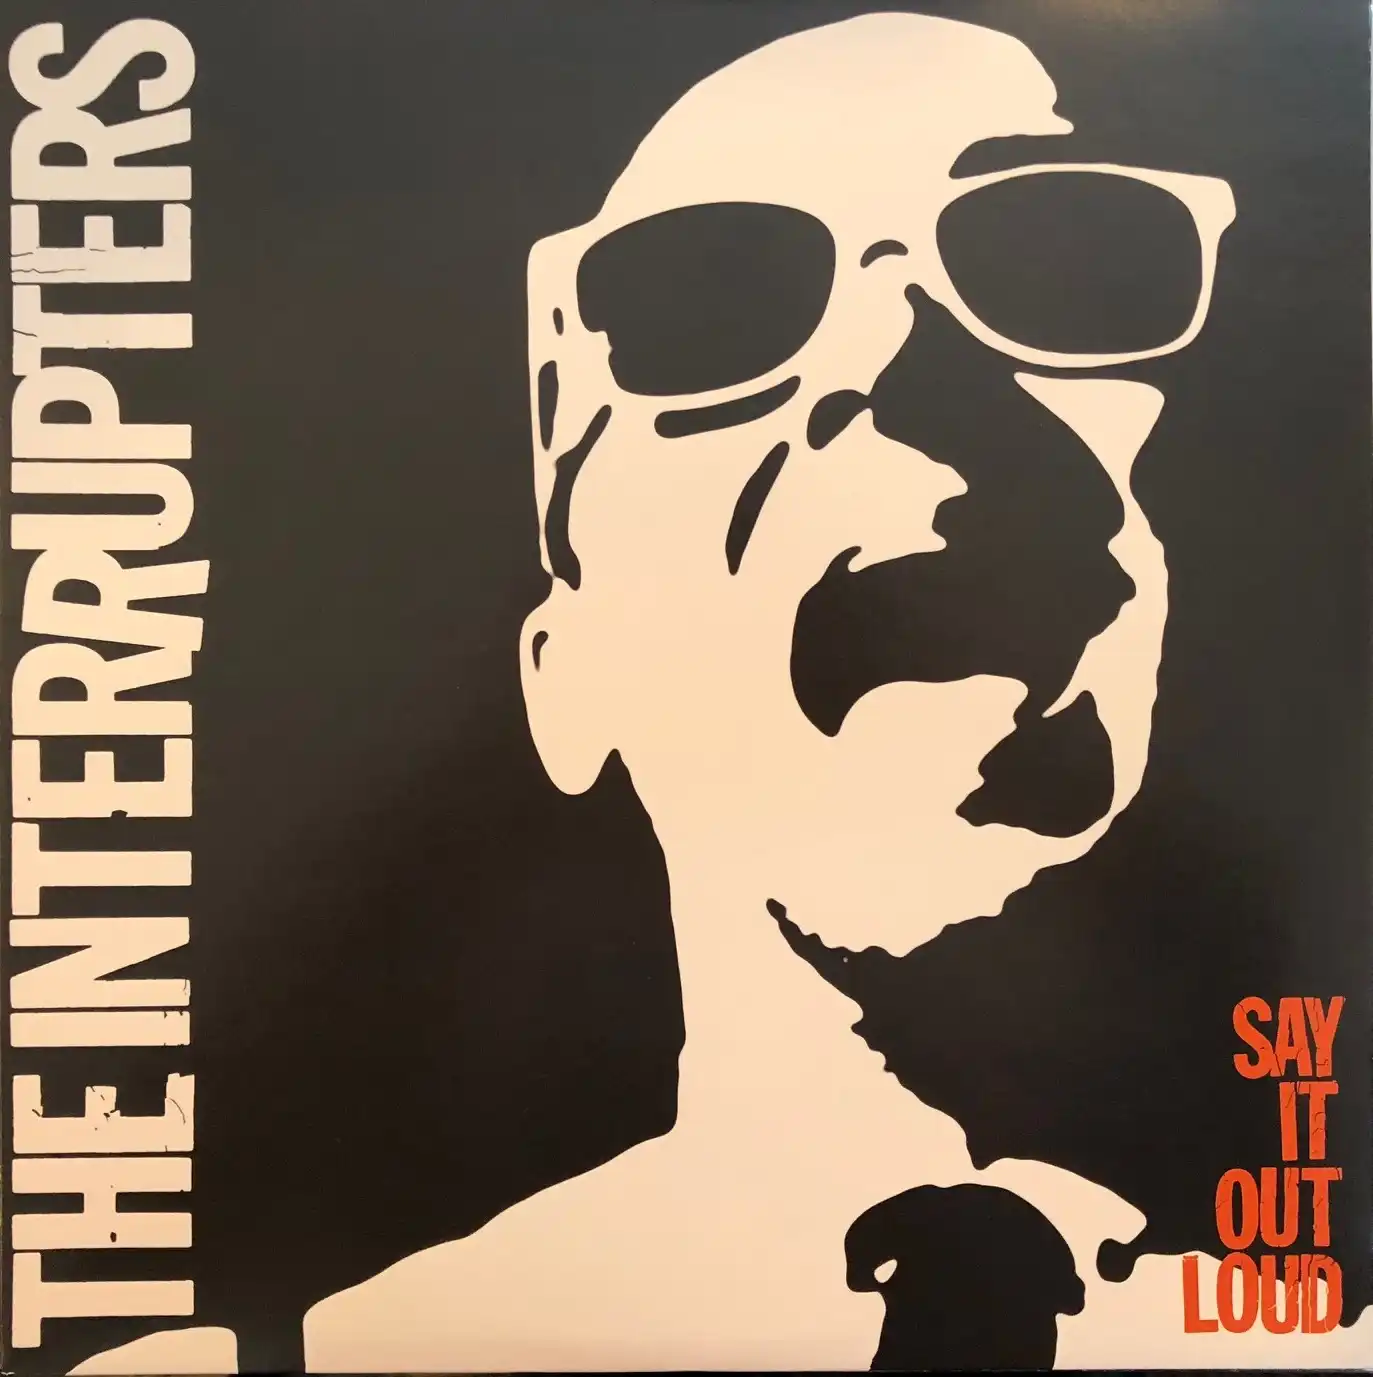 INTERRUPTERS / SAY IT OUT LOUD